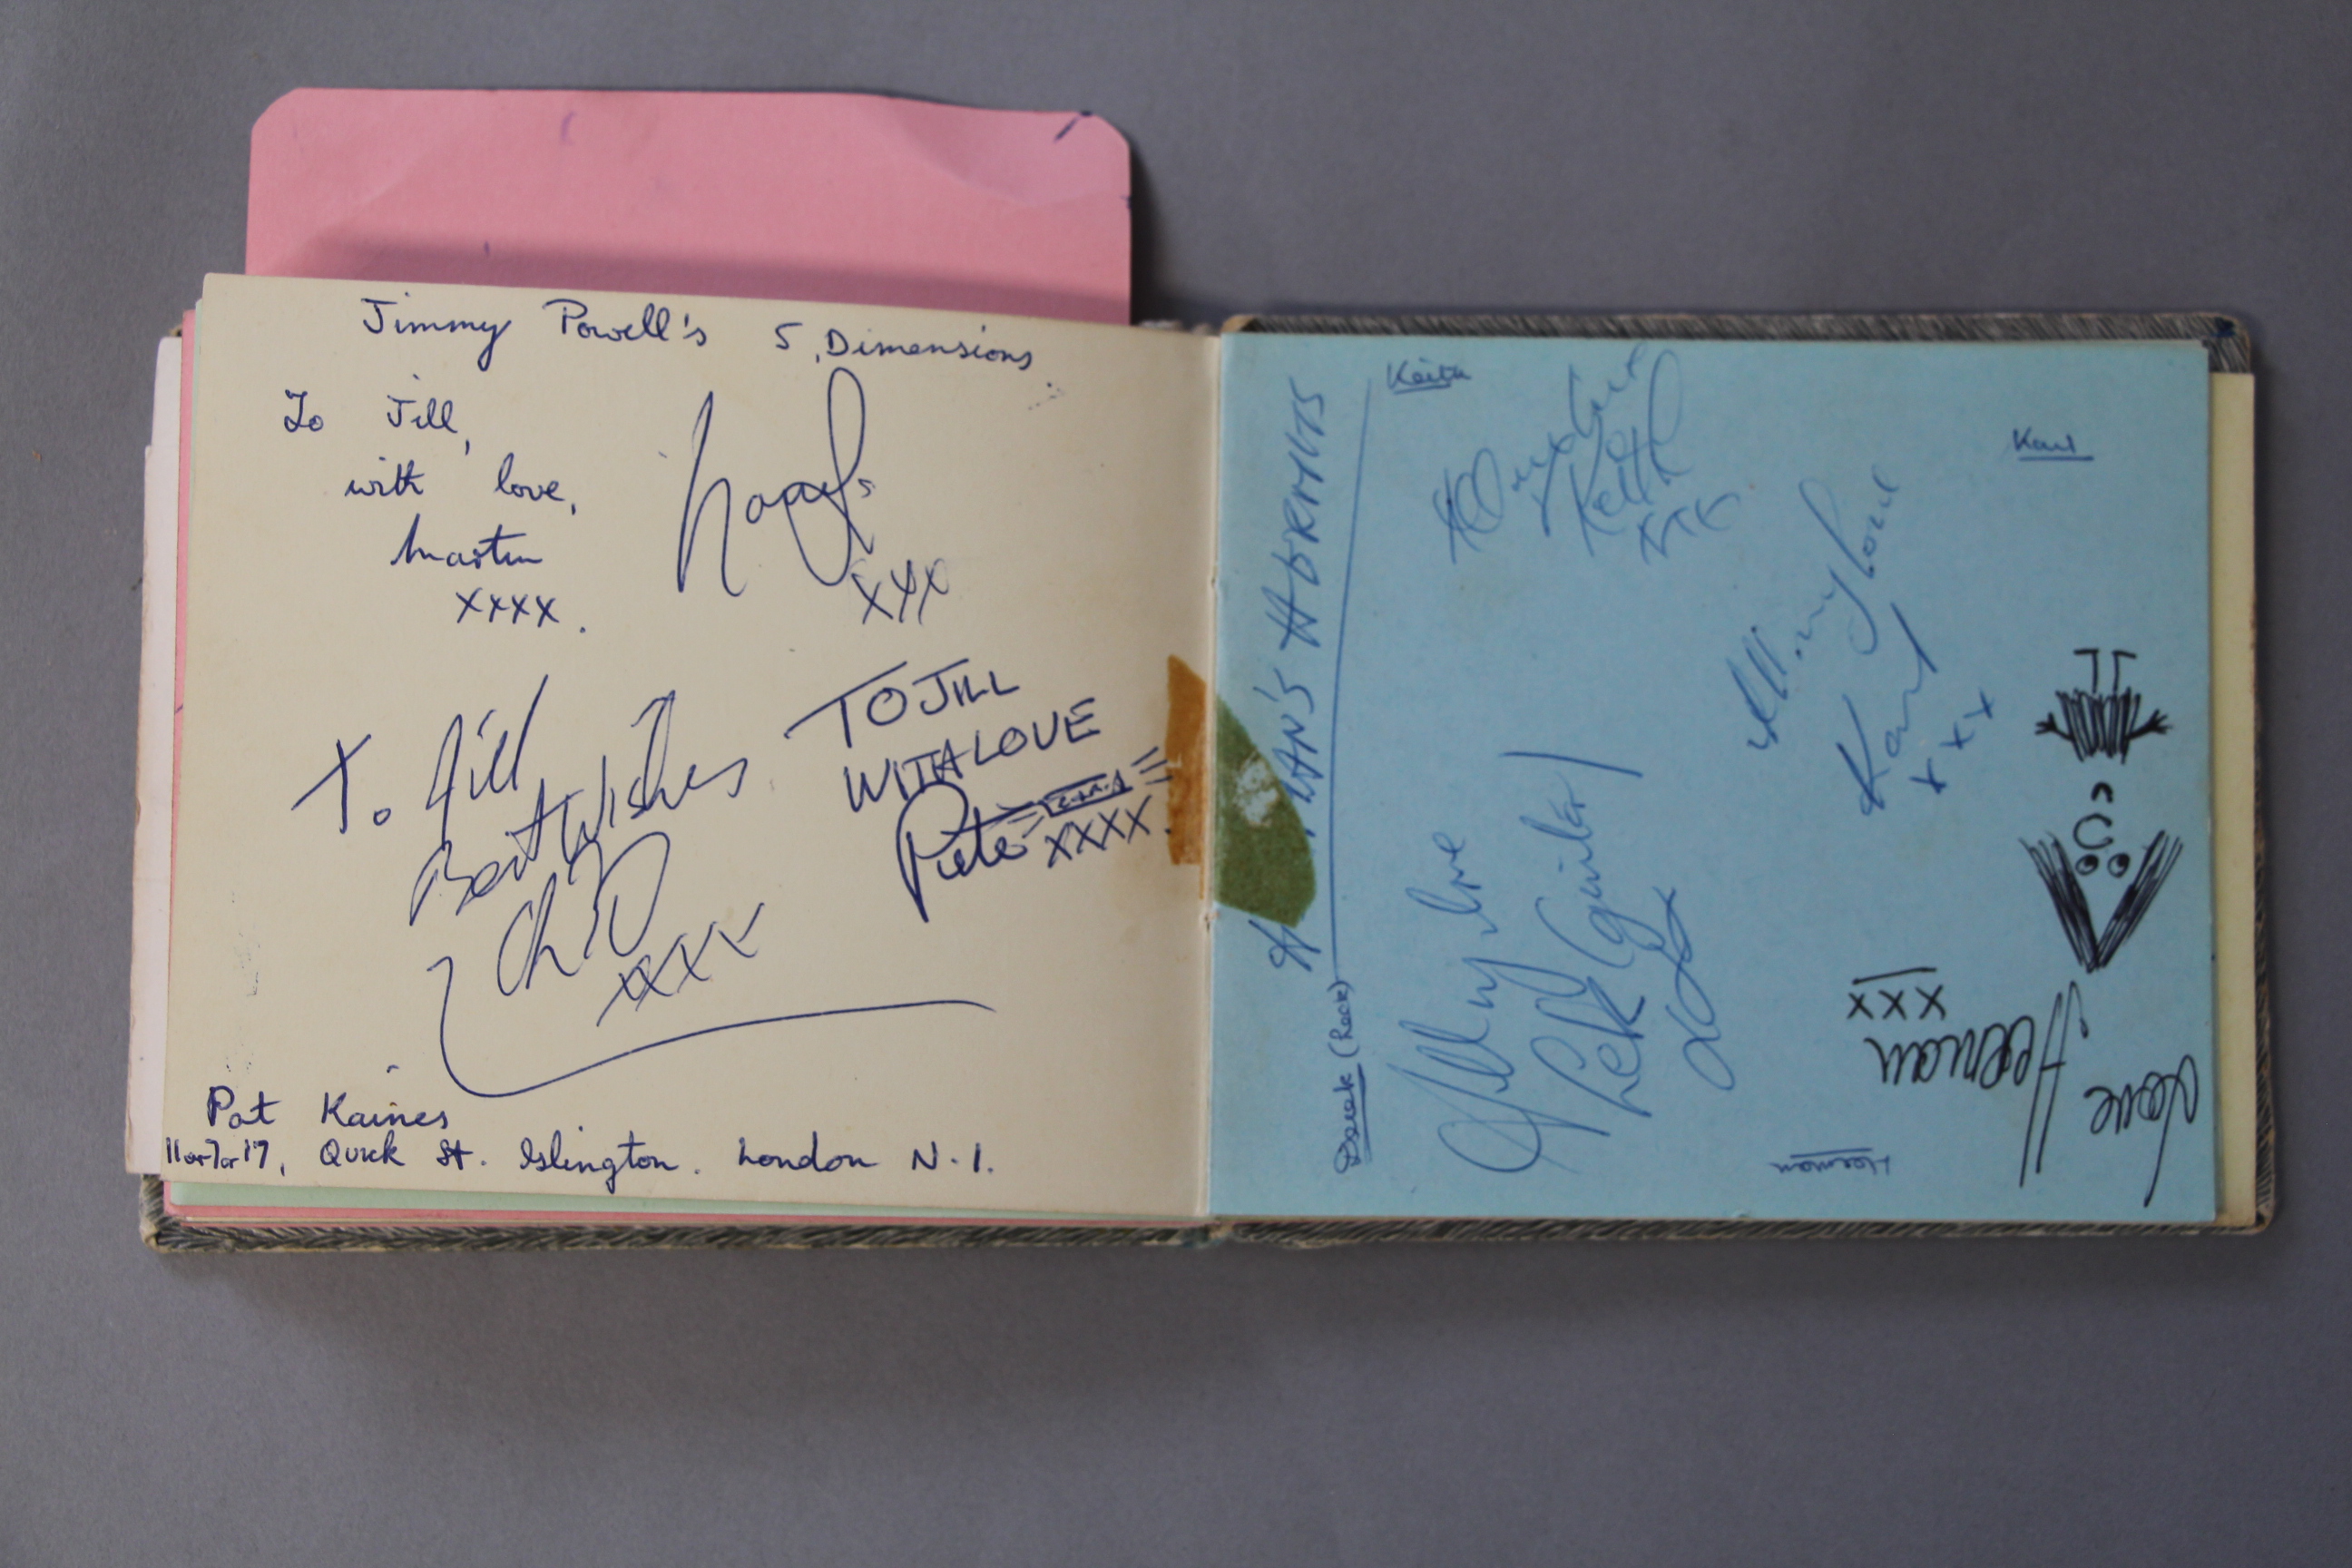 An autograph book with signatures and many car registrations of the groups collected personally by - Image 18 of 22